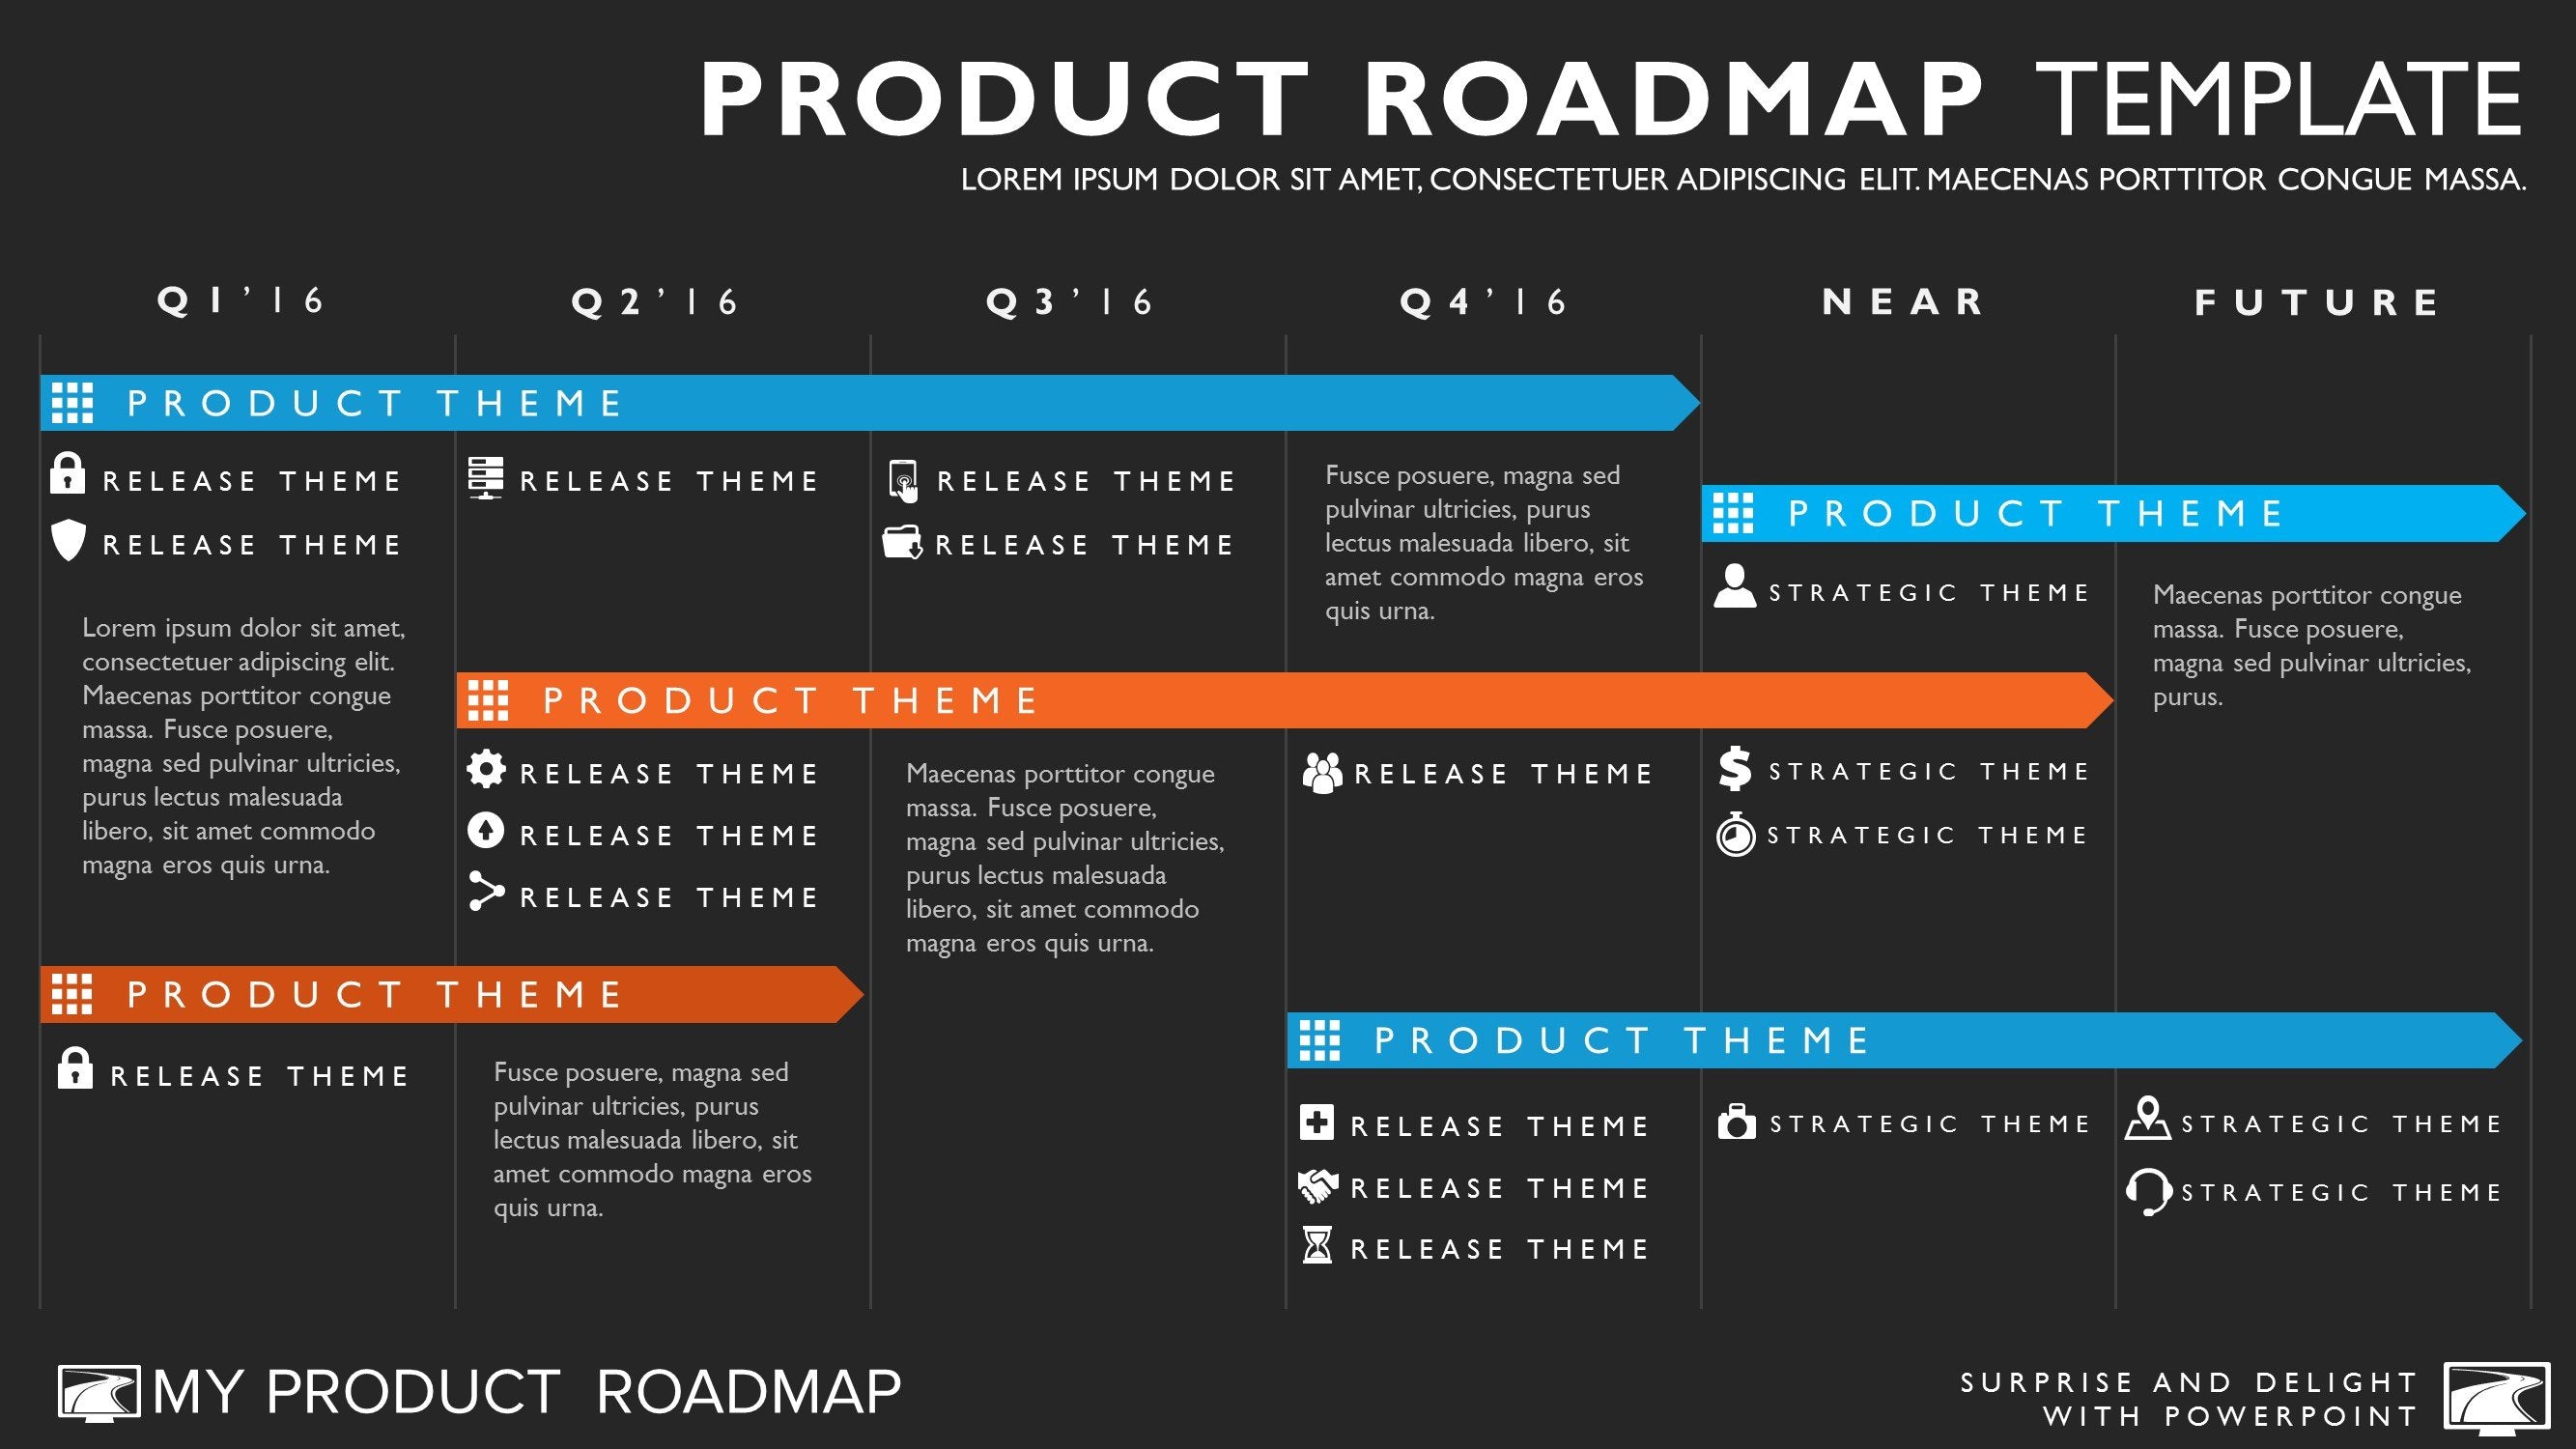 technology-roadmap-template-ppt-free-download-contoh-gambar-template